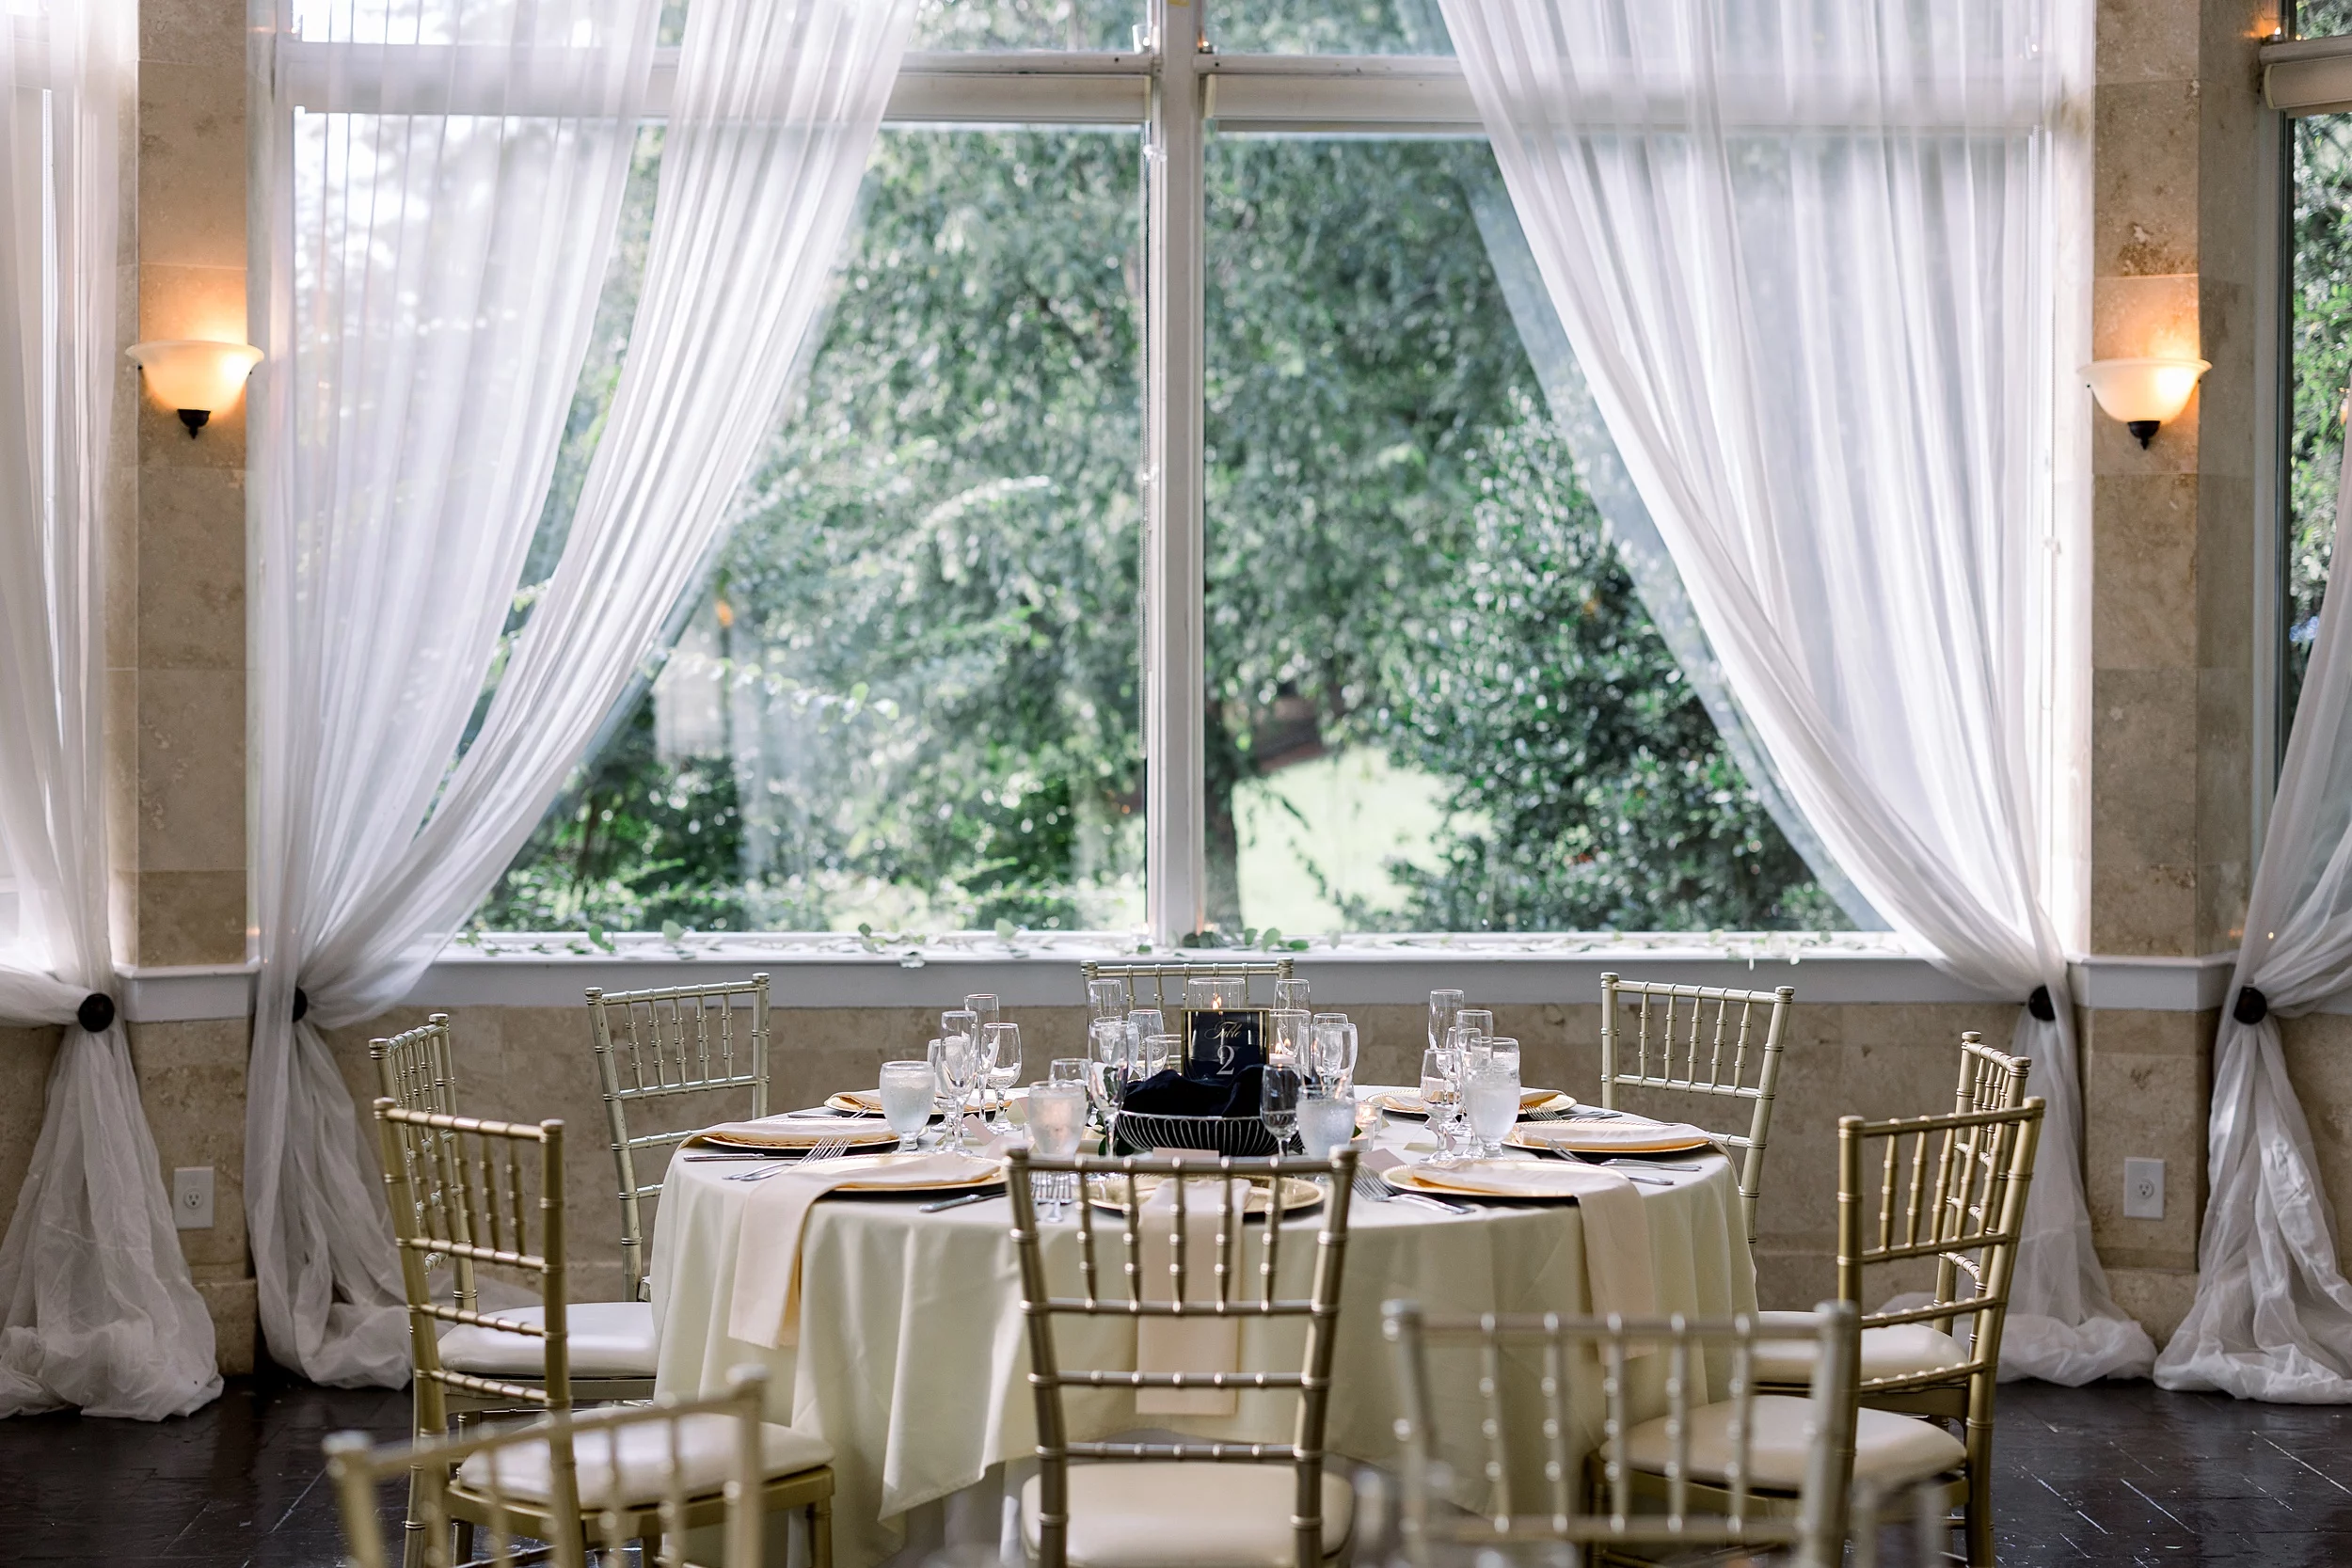 Table setting under a window with gold chairs and neutral linens